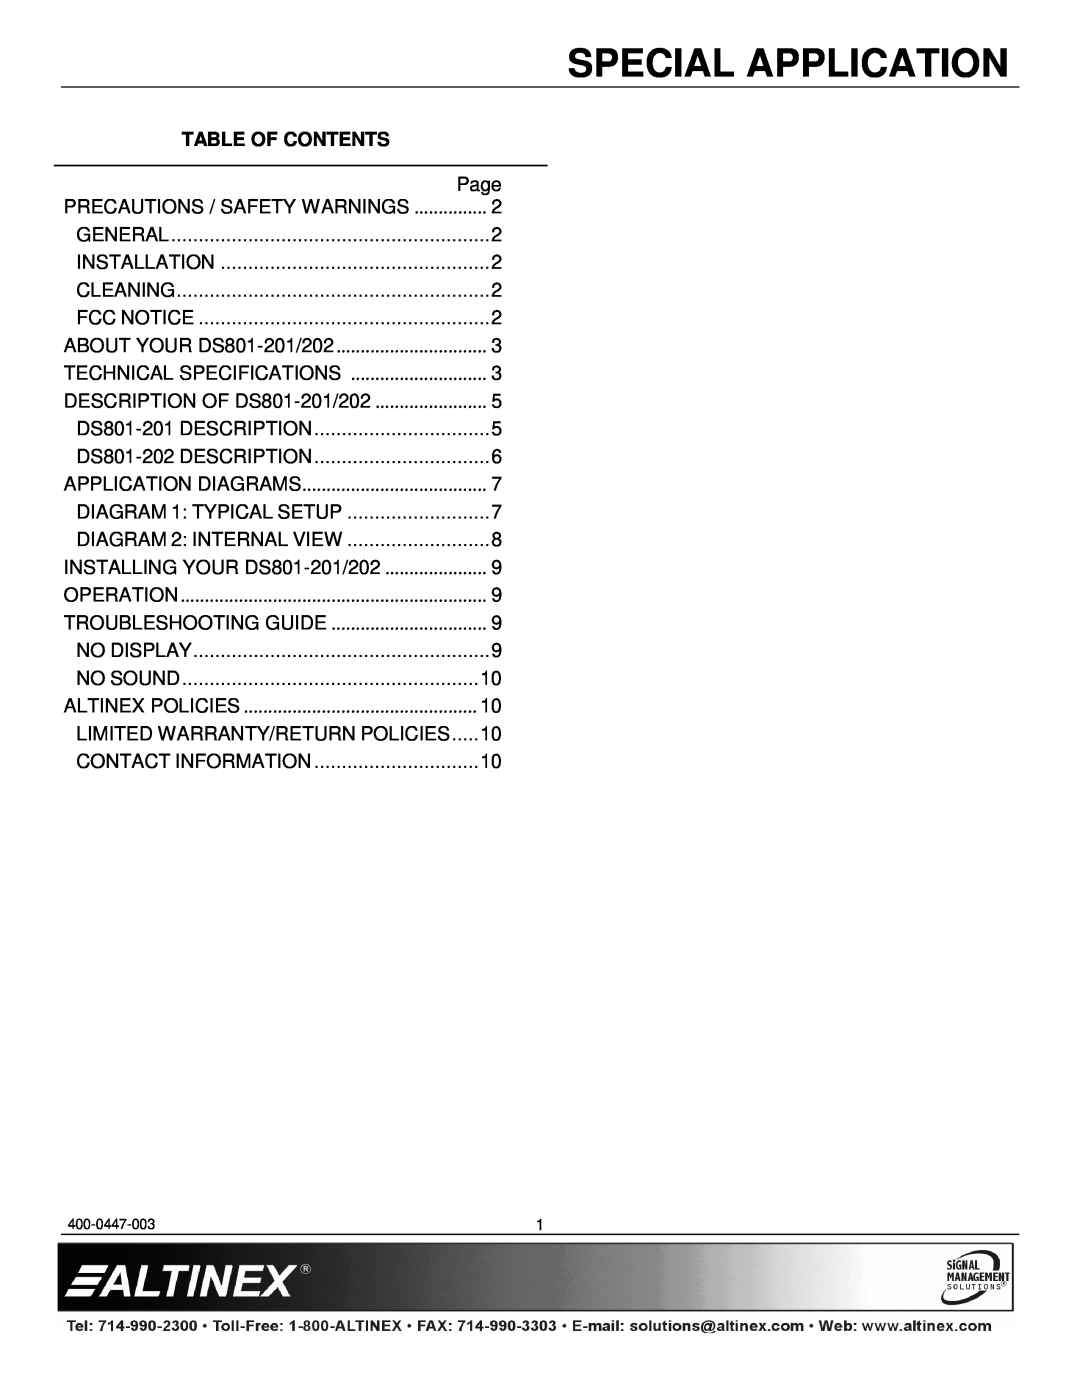 Altinex DS801-202, DS801-201 manual Table Of Contents, Special Application, Page 